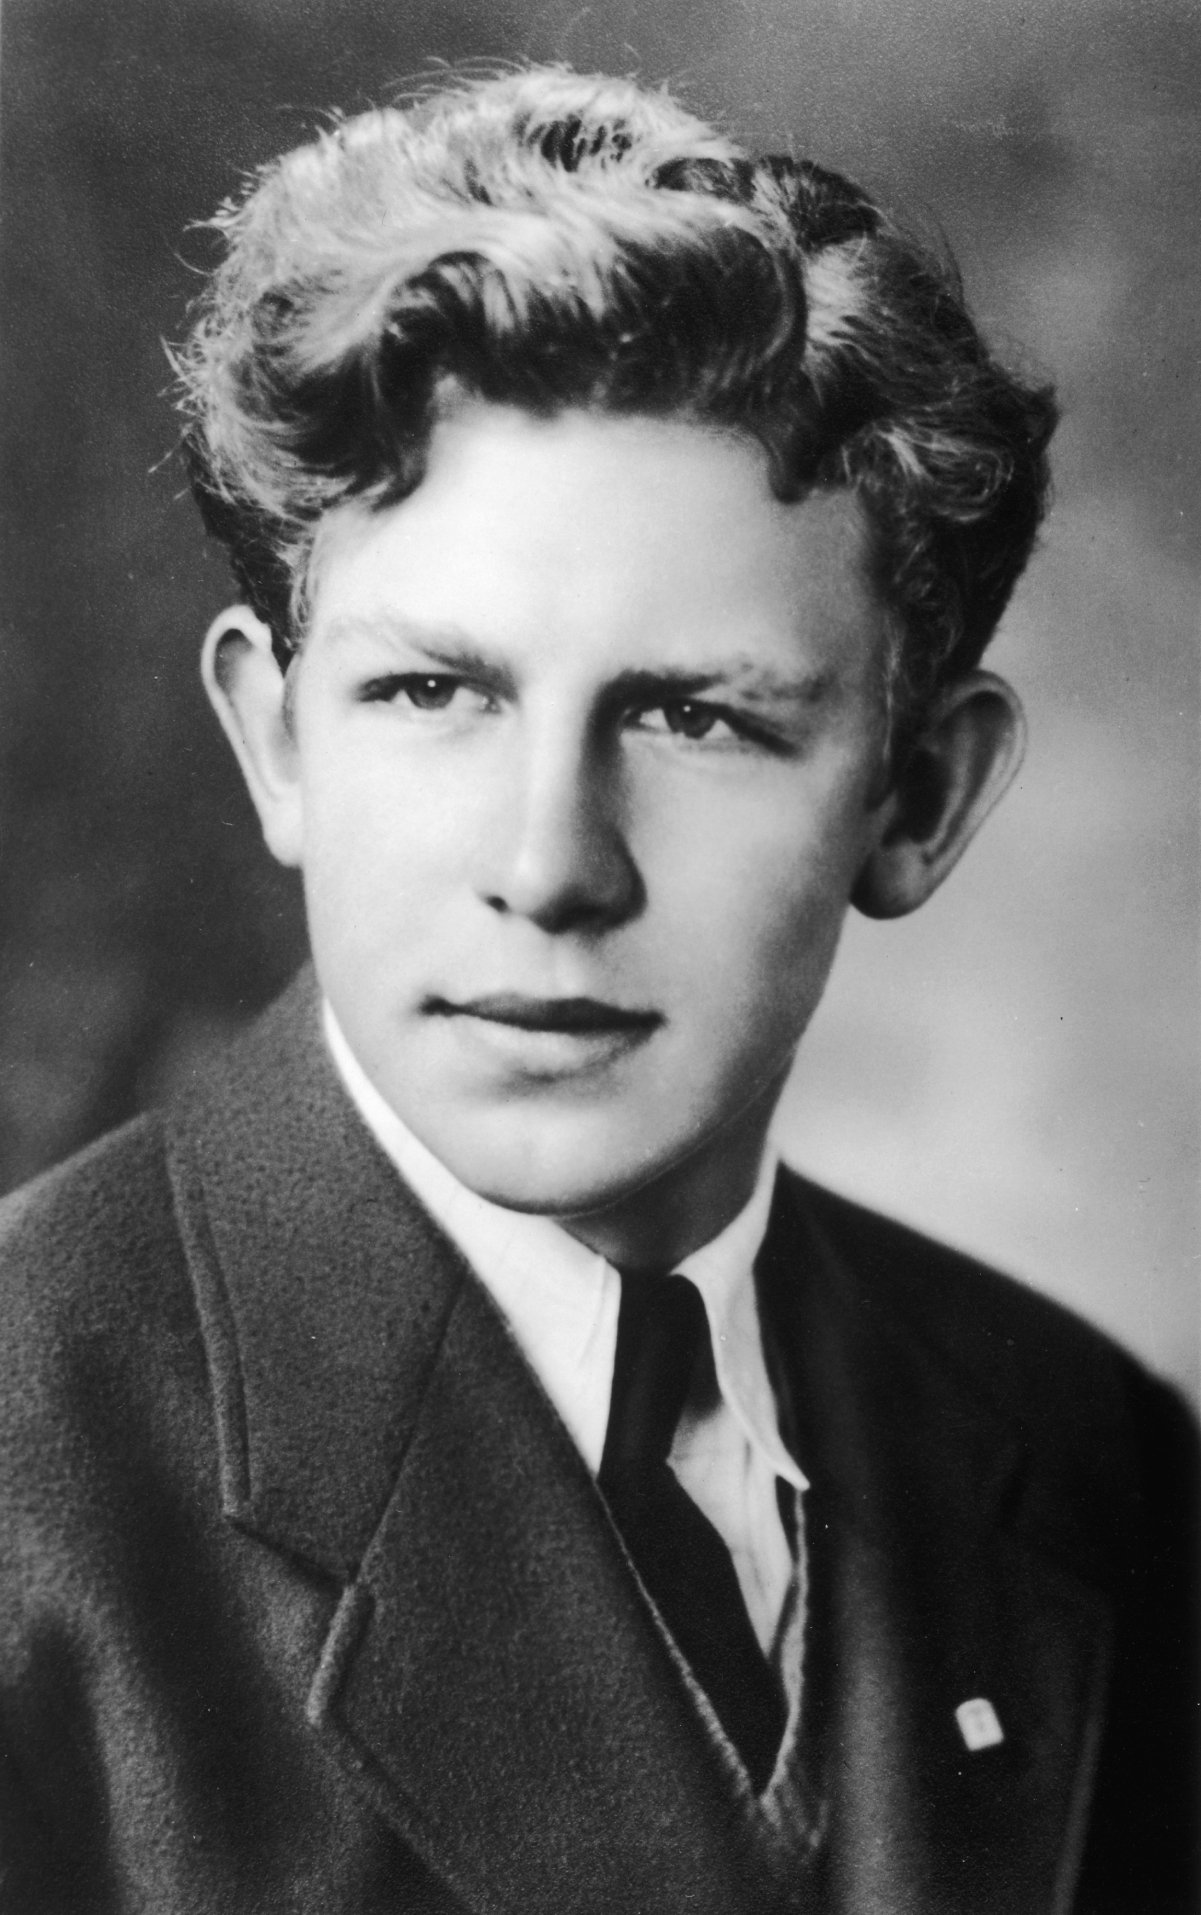 Andy Griffith in 1940